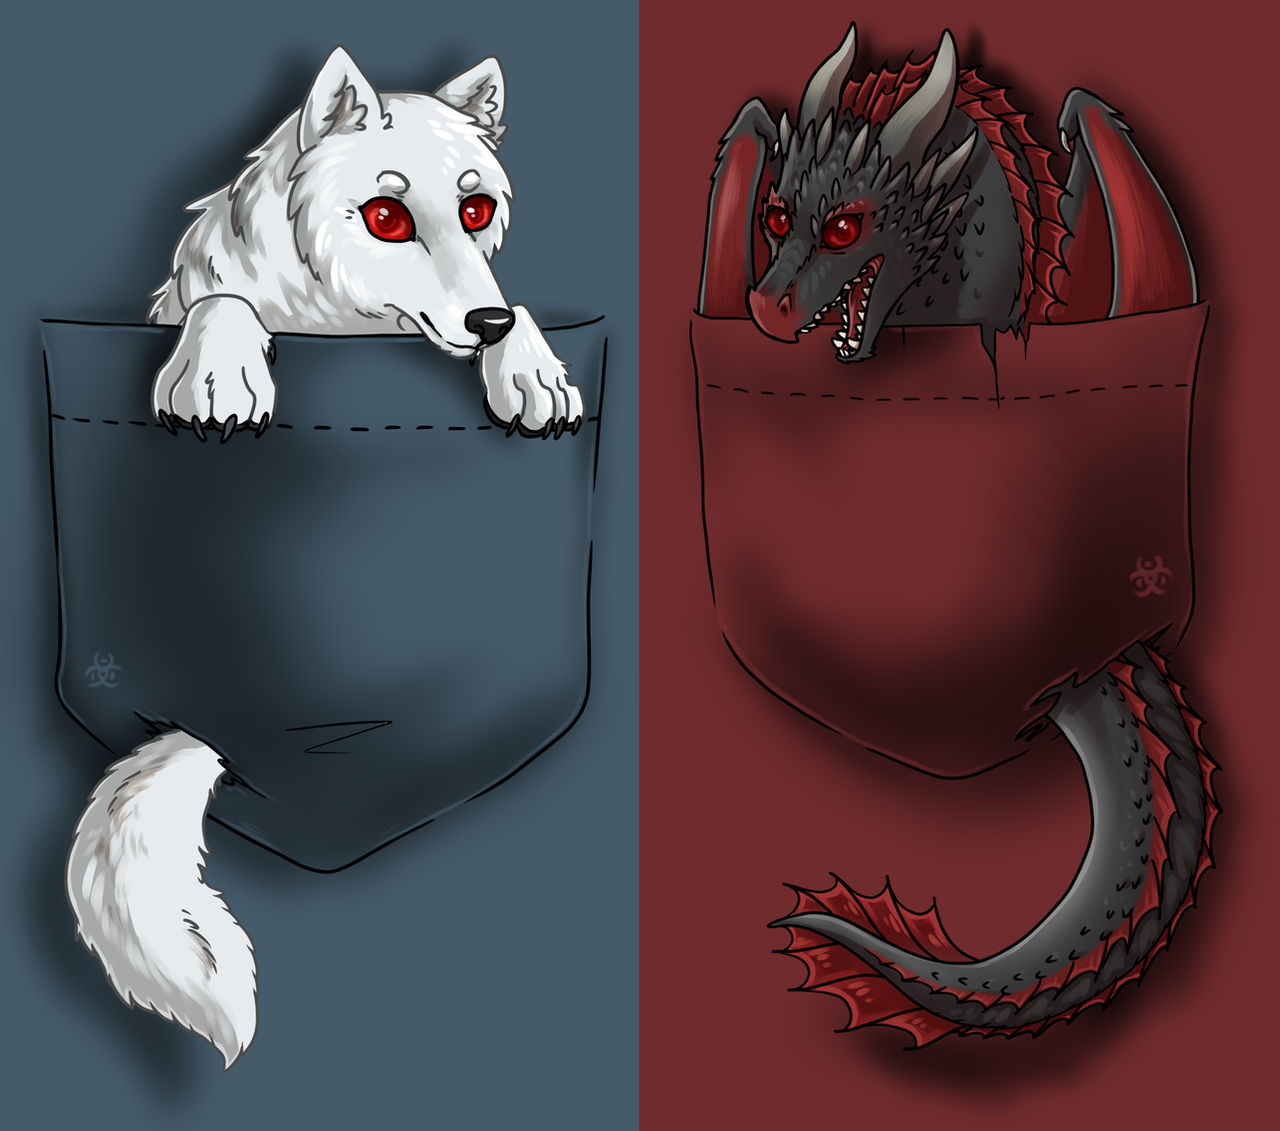 Game Of Thrones Pocket Ghost And Drogon By Biohazardia On Deviantart